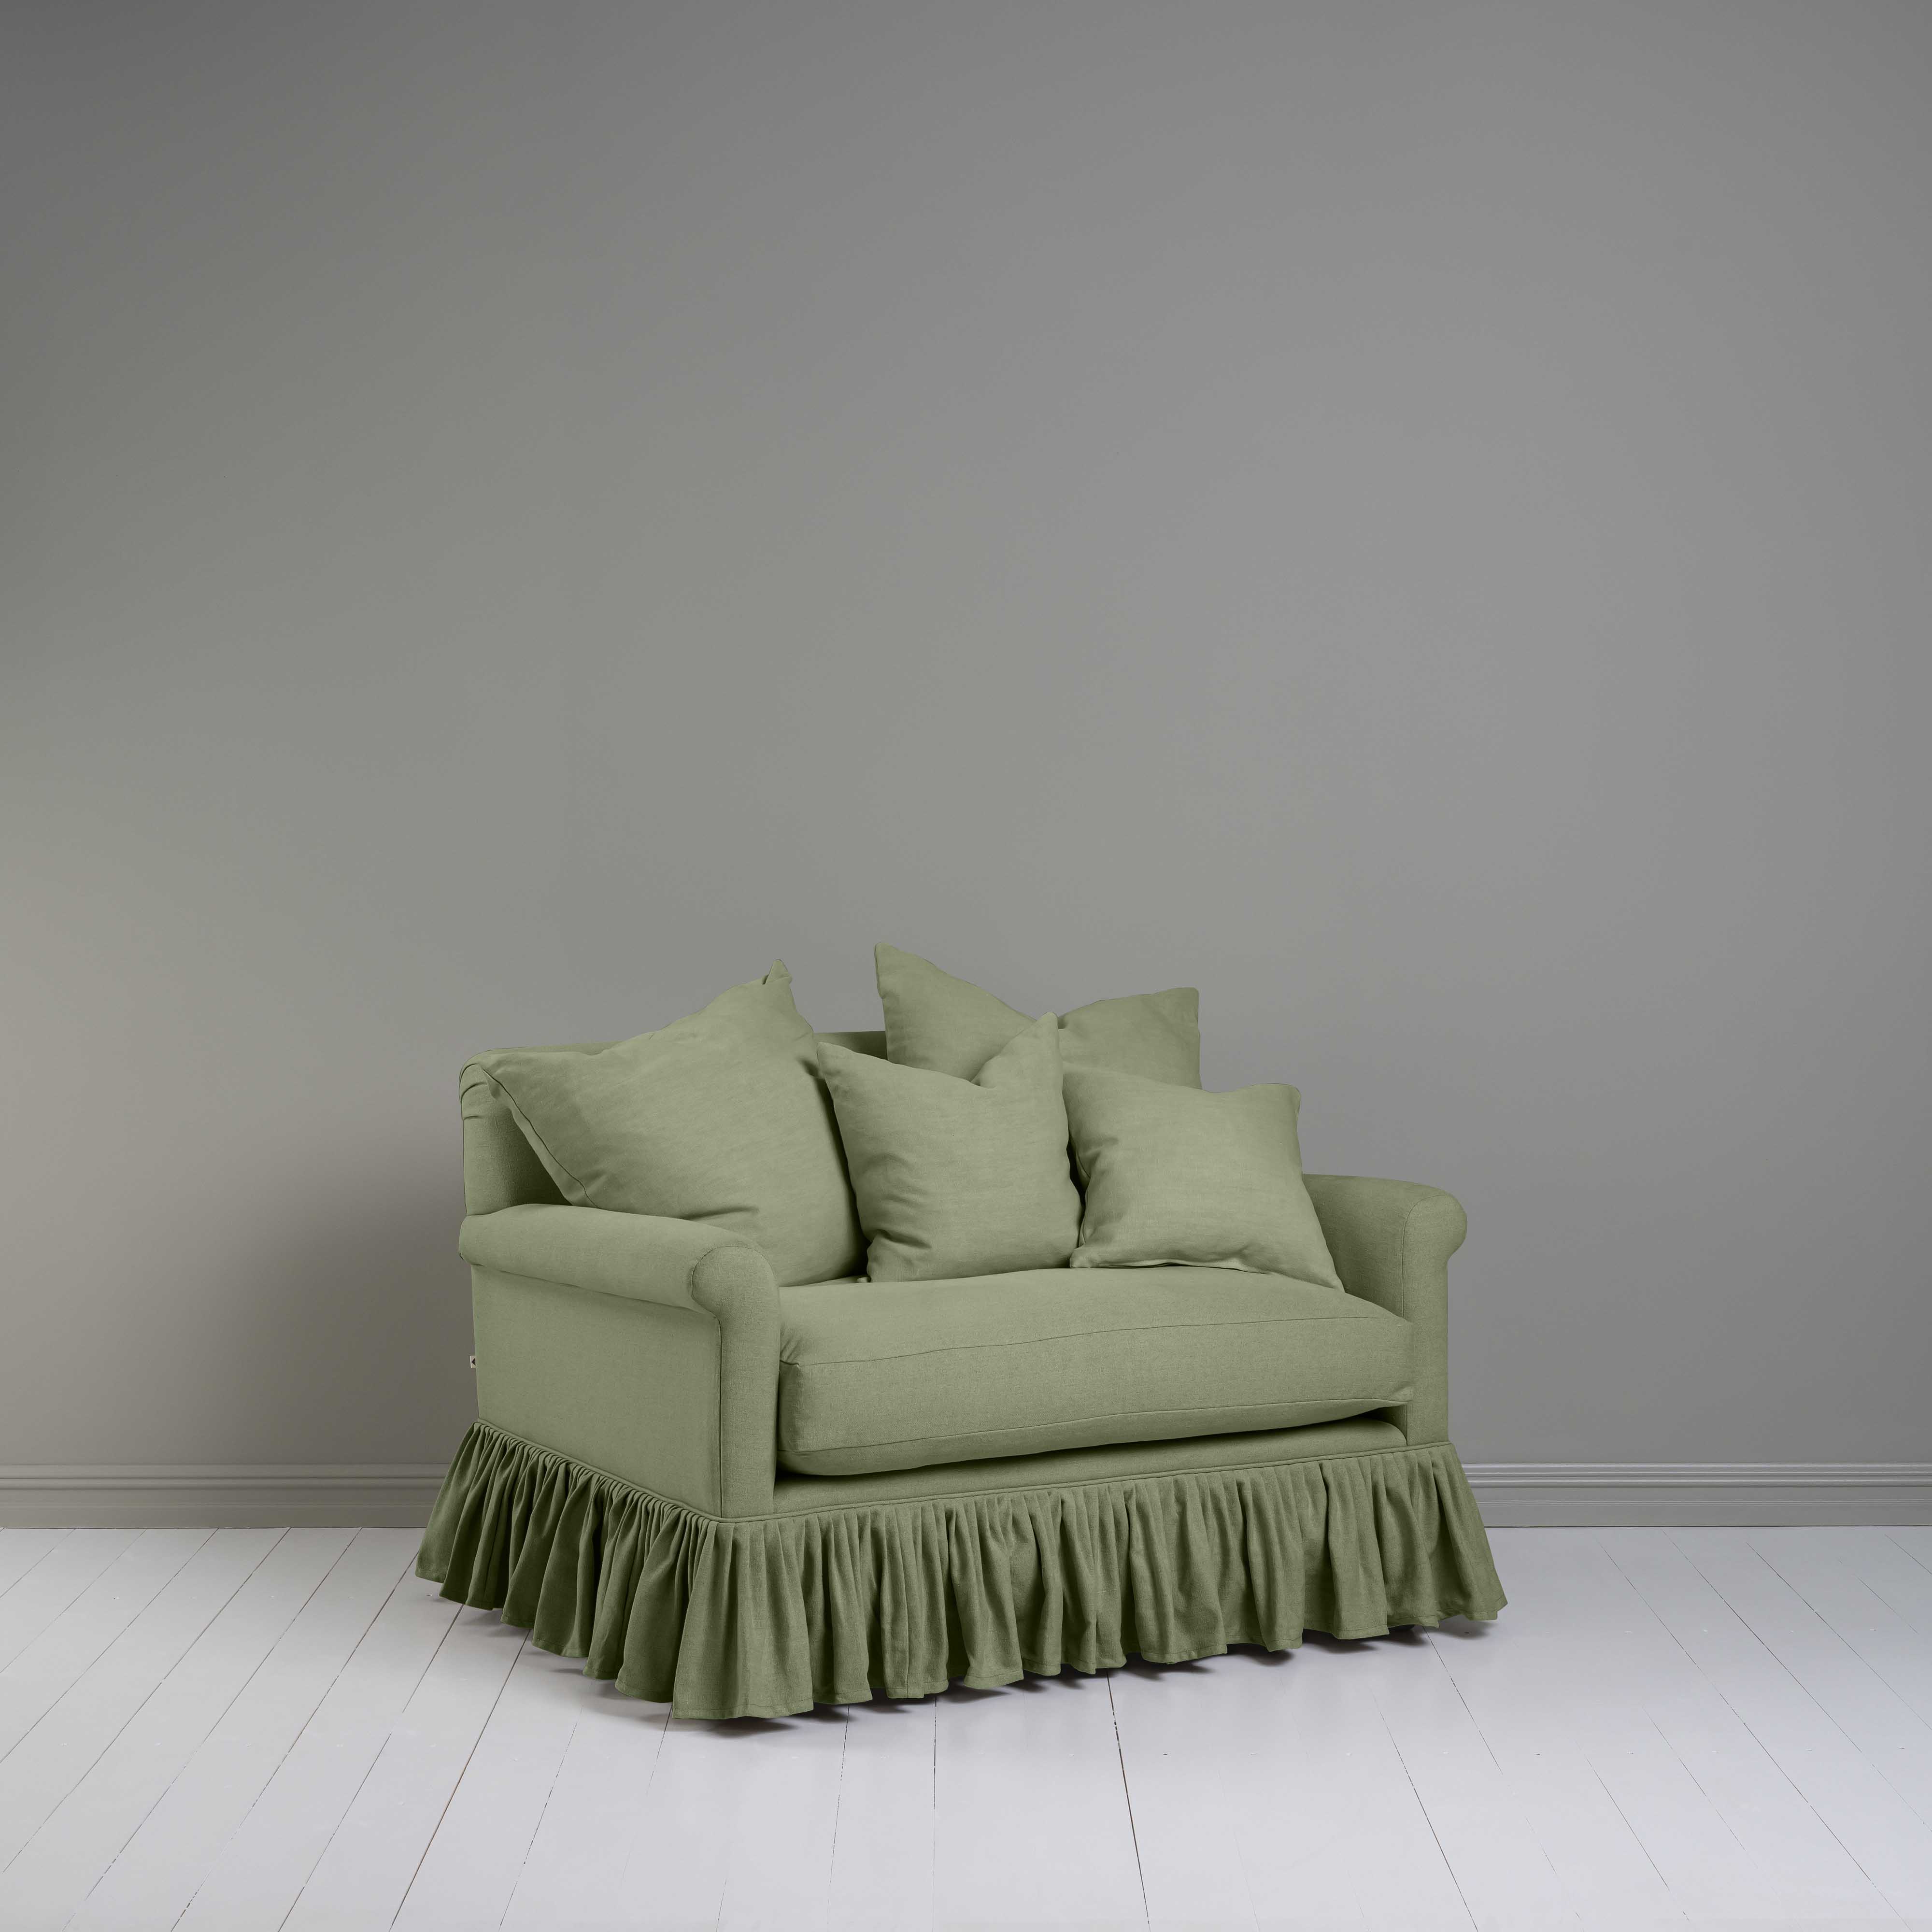  Curtain Call Love Seat in Laidback Linen Moss 